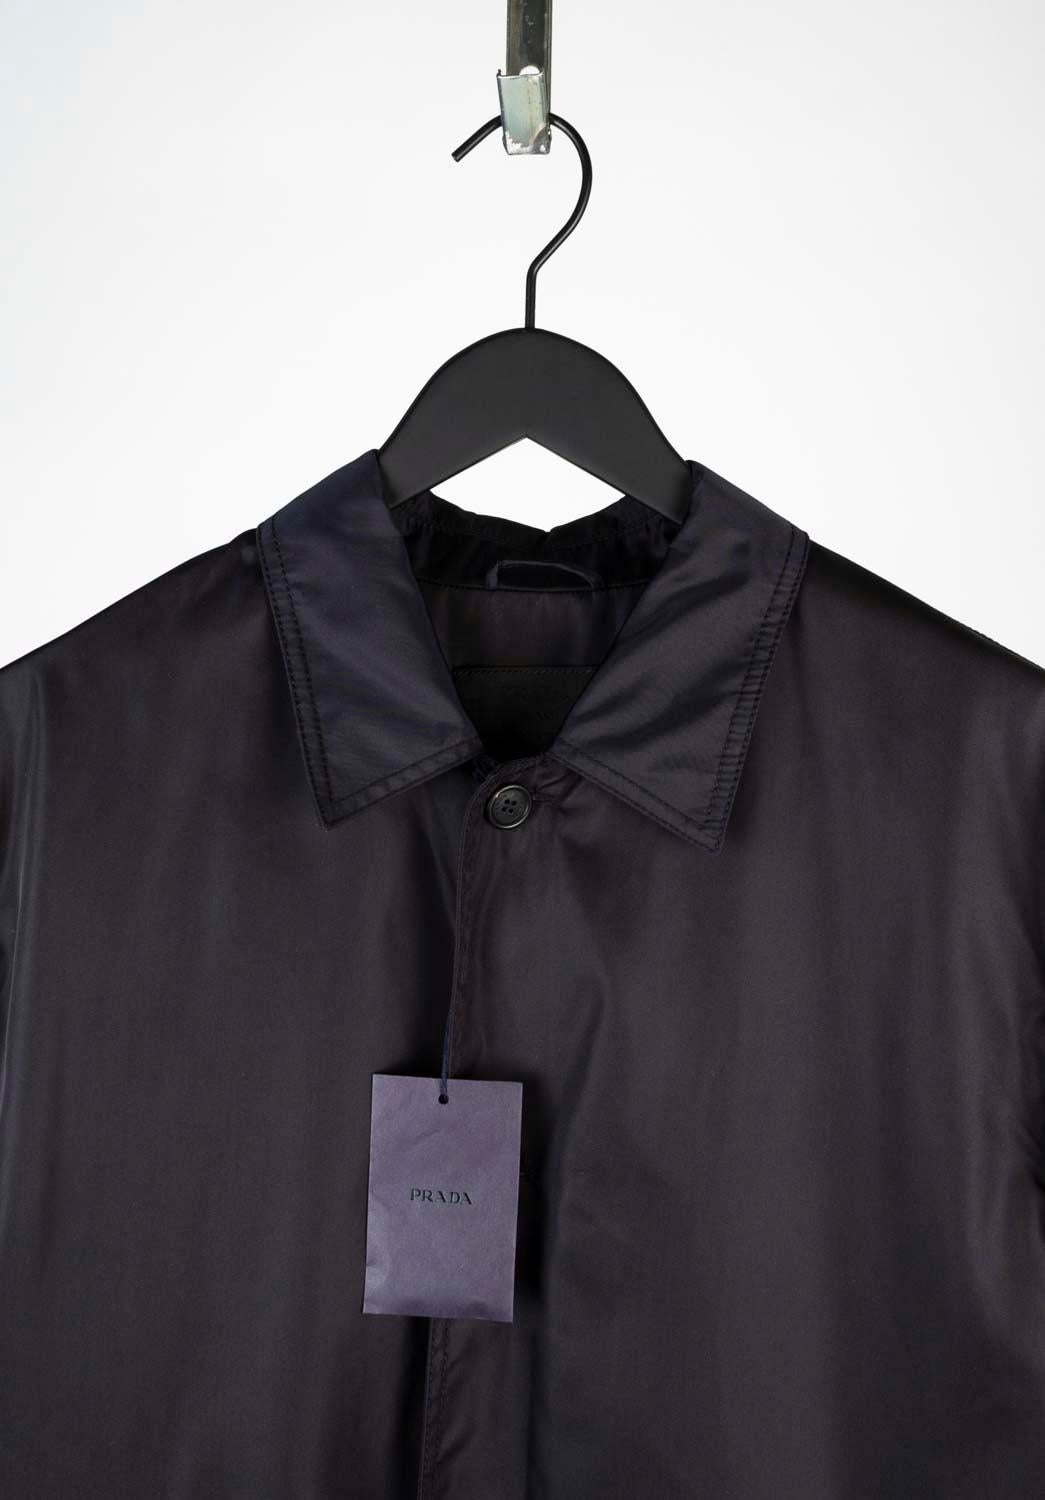 100% genuine New Prada Raincoat, S569
Color: Black
(An actual color may a bit vary due to individual computer screen interpretation)
Material: 100% nylon
Tag size: XL
This jacket is great quality item. Rate 10 of 10, new with tags.
Actual 